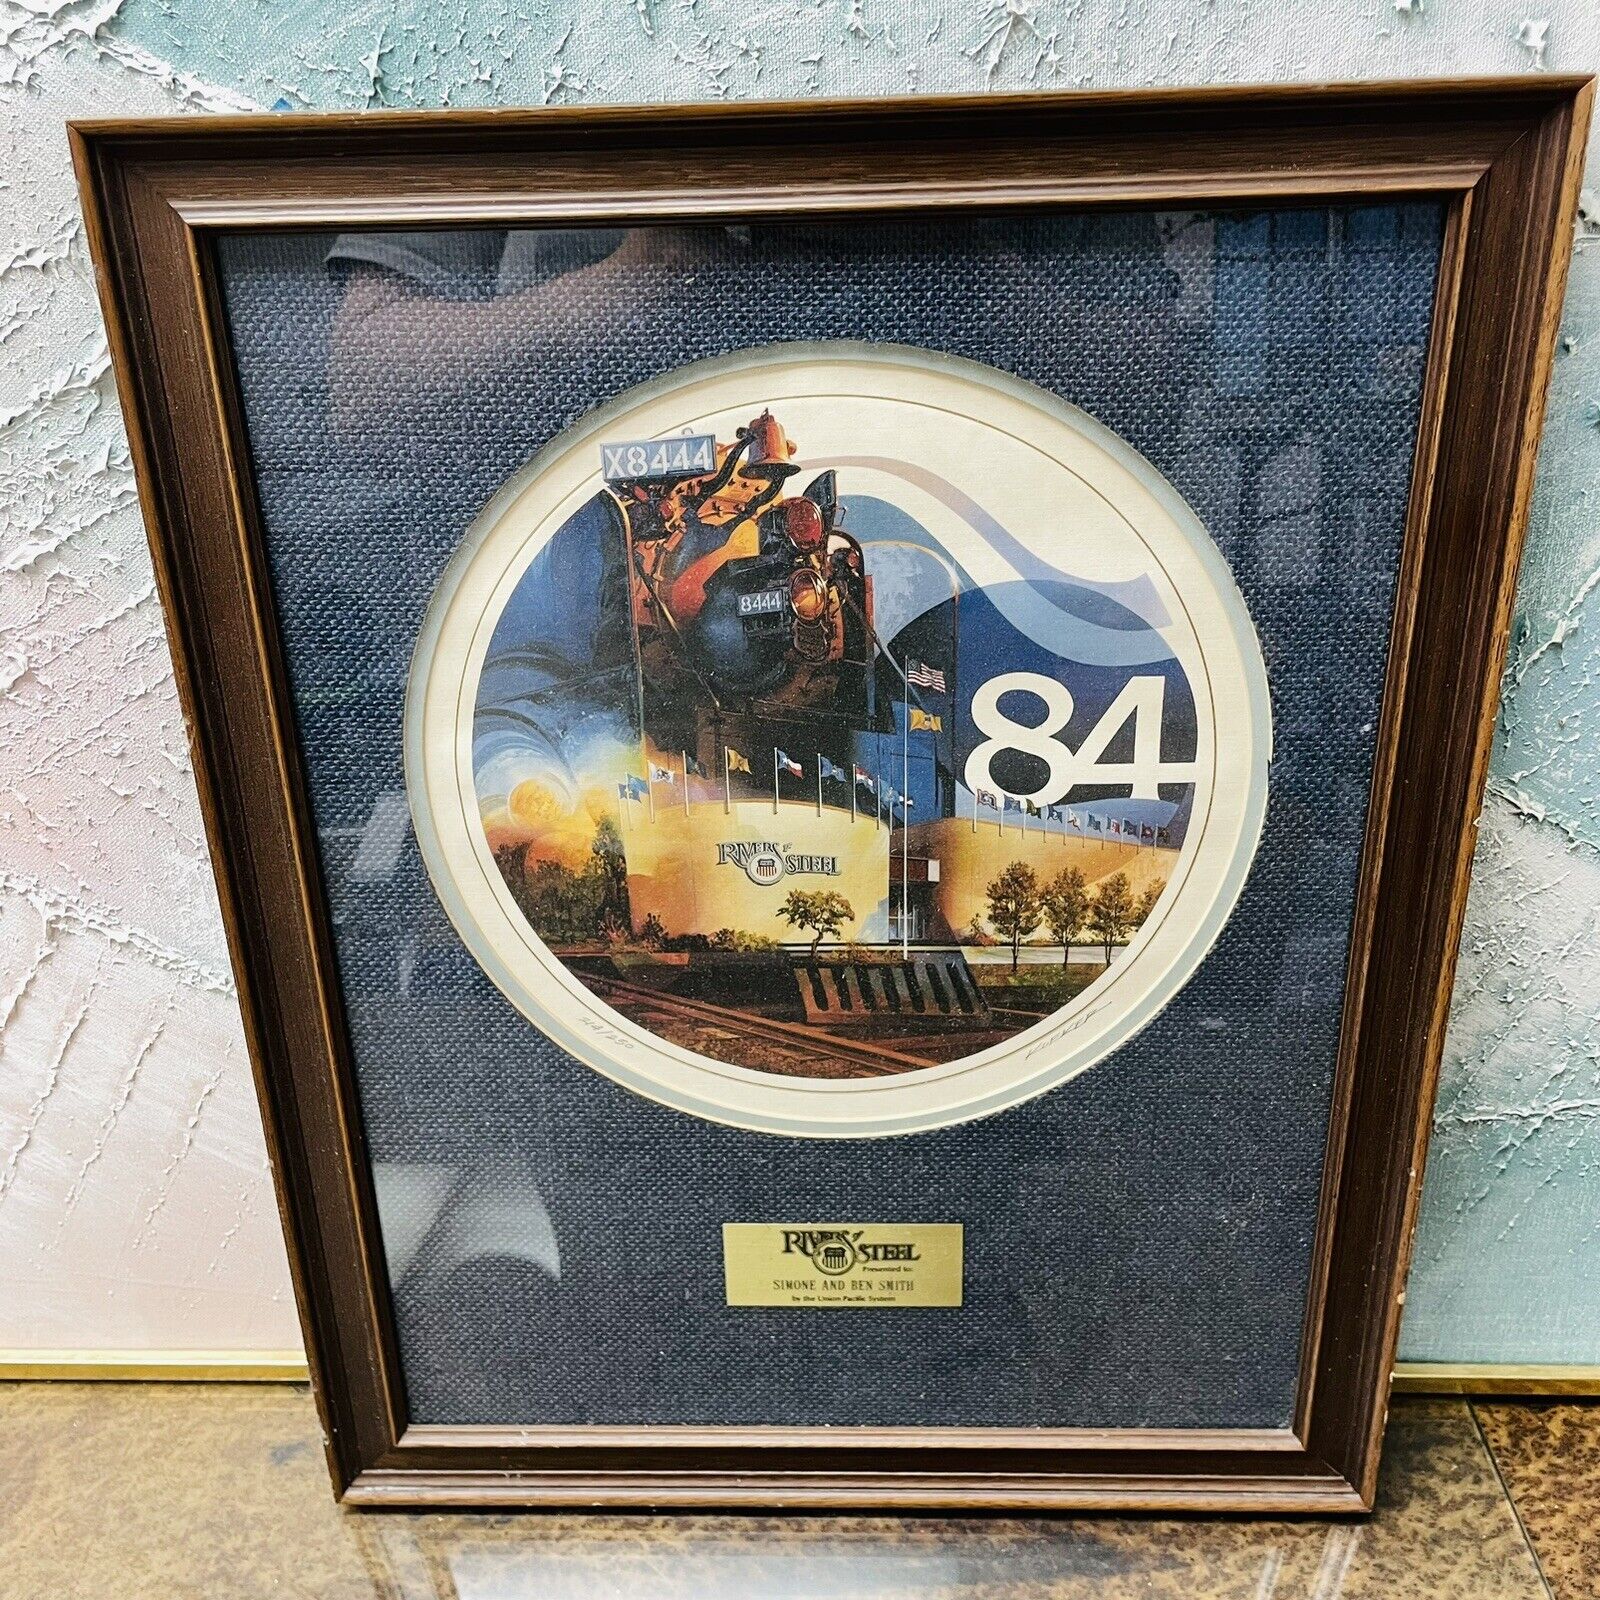 Rivers Of Steel Union Pacific System X8444 Framed Commemorative Plaque 20” x 16”